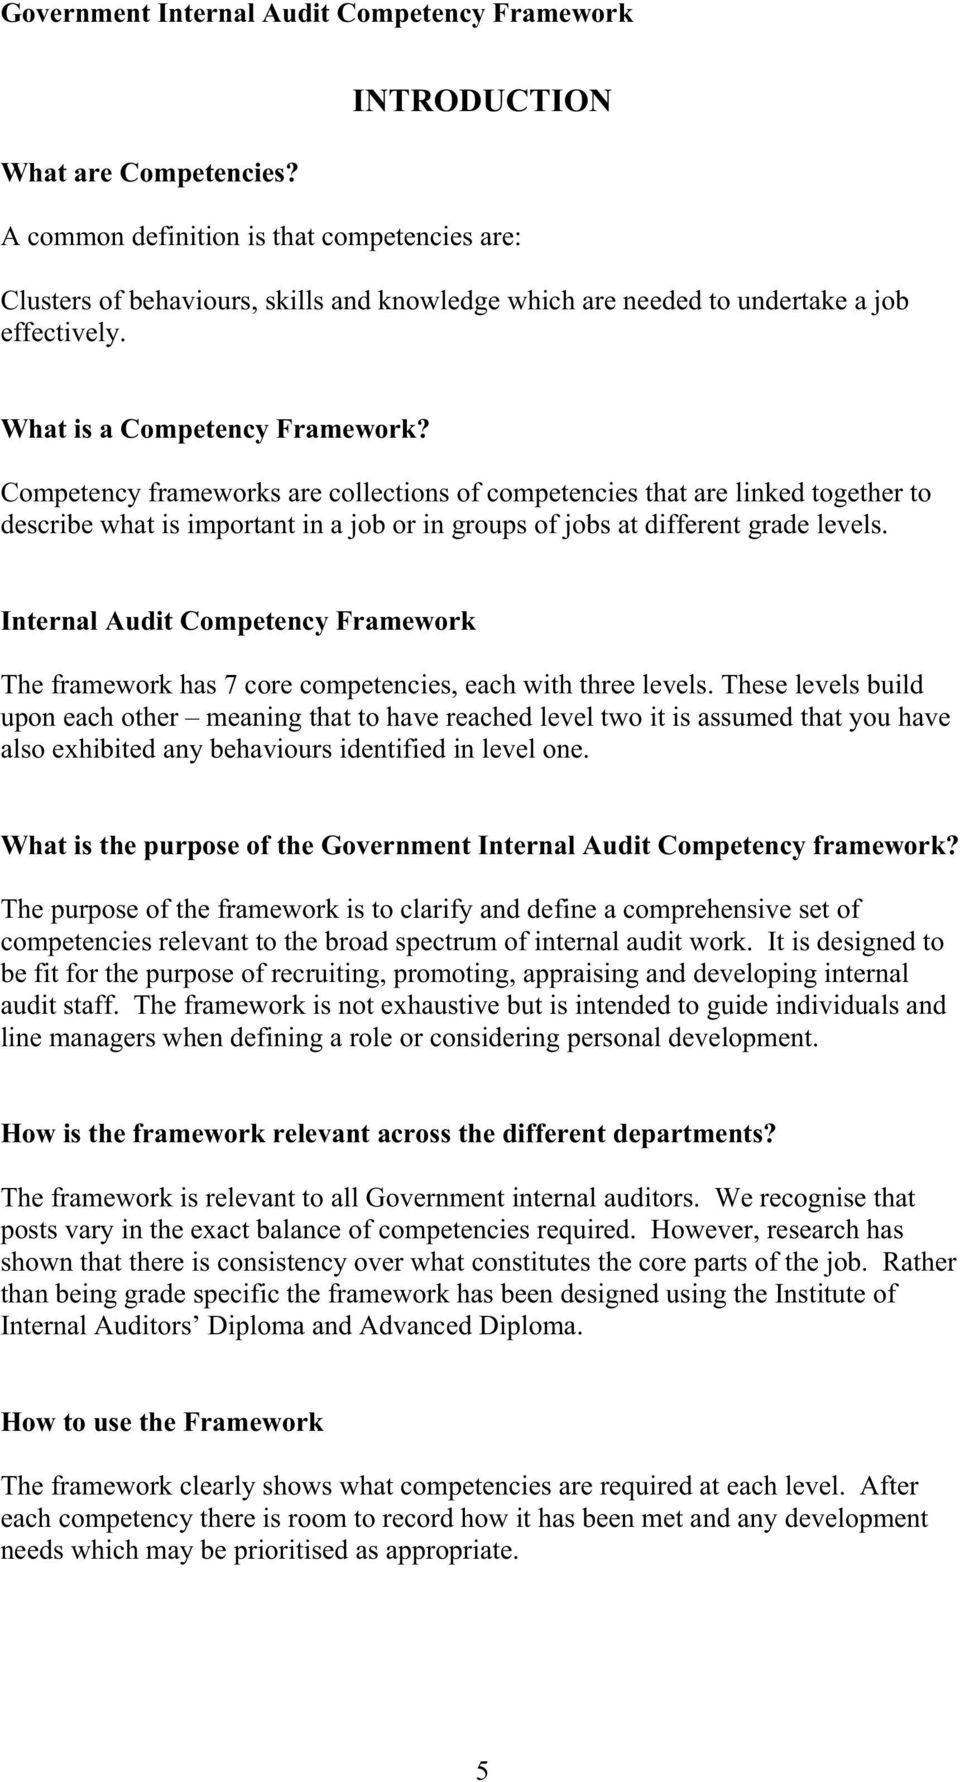 Internal Audit Competency Framework The framework has 7 core competencies, each with three levels.